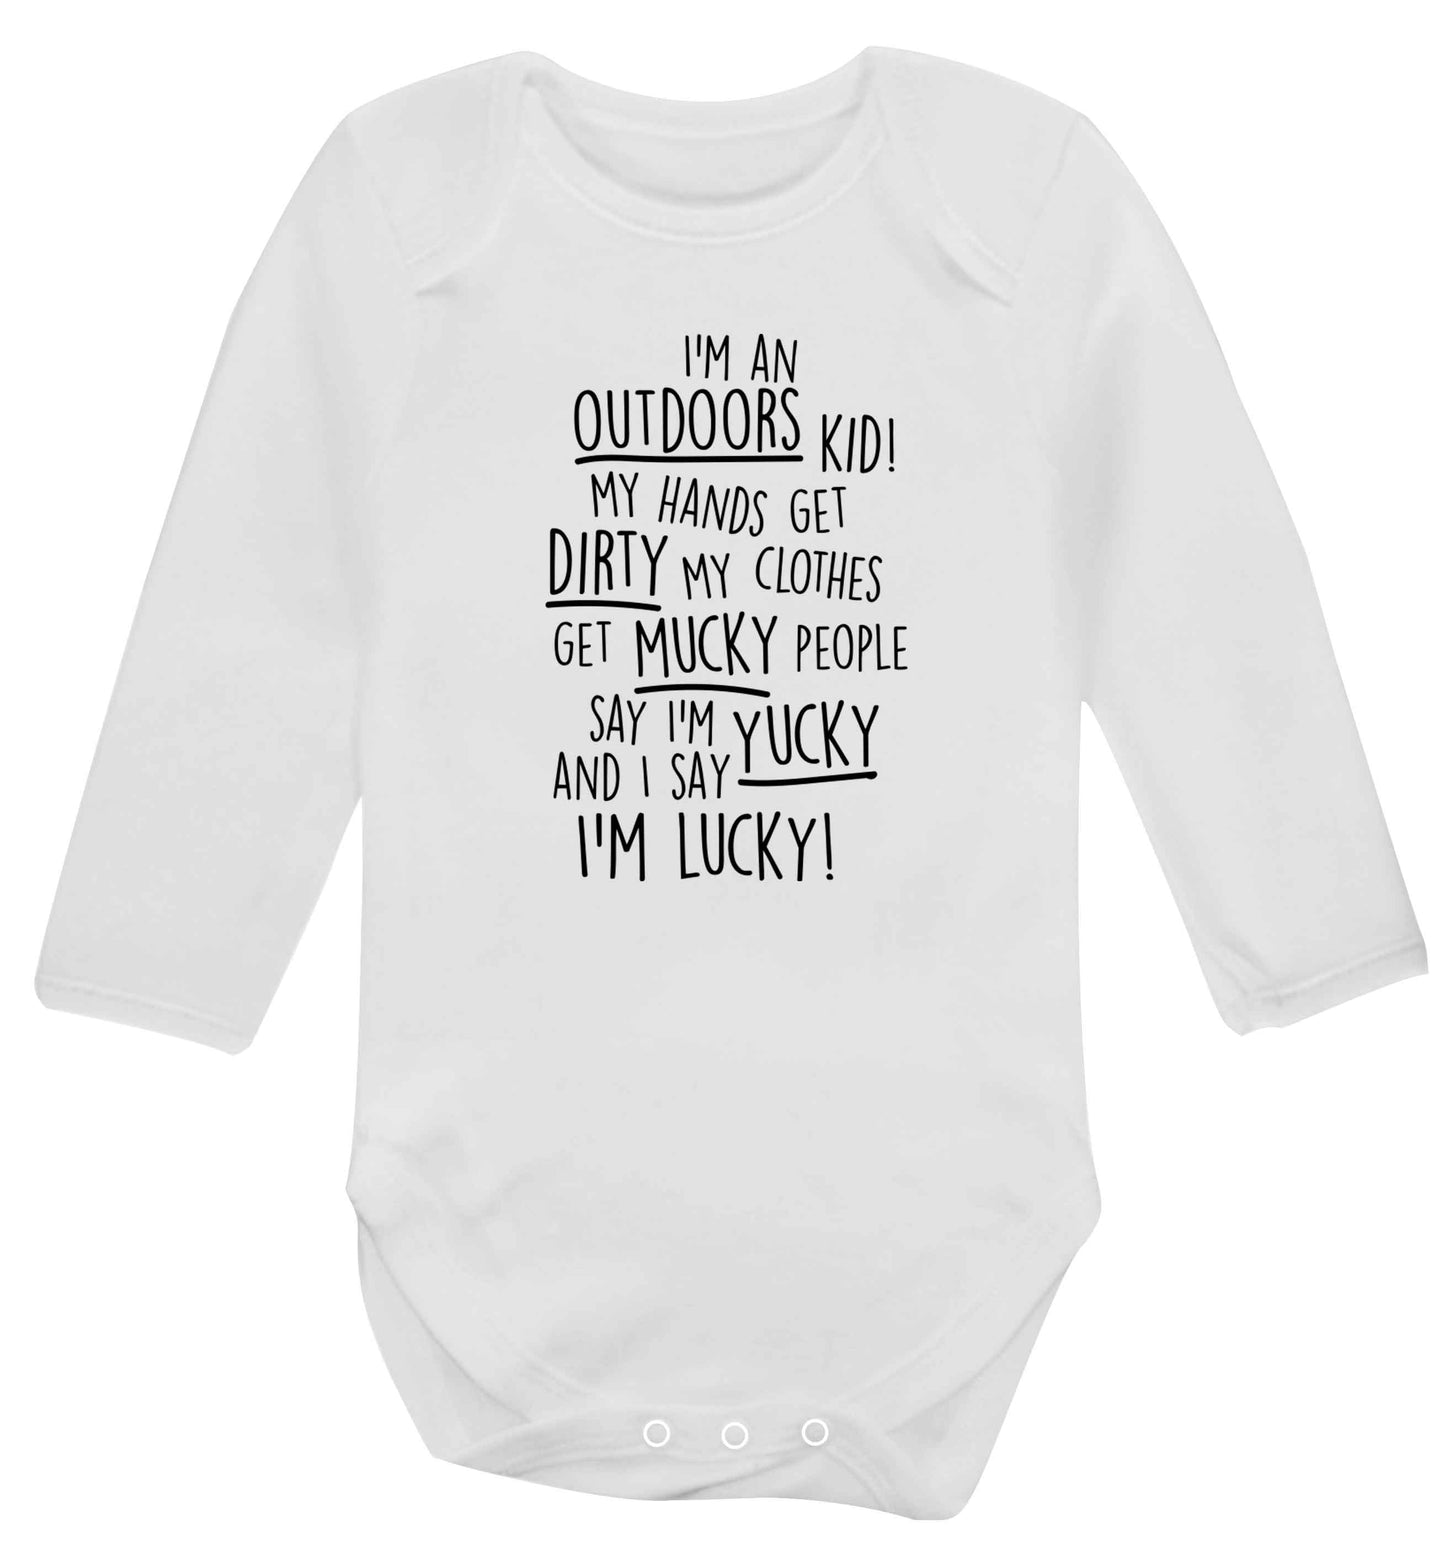 I'm an outdoors kid poem Baby Vest long sleeved white 6-12 months